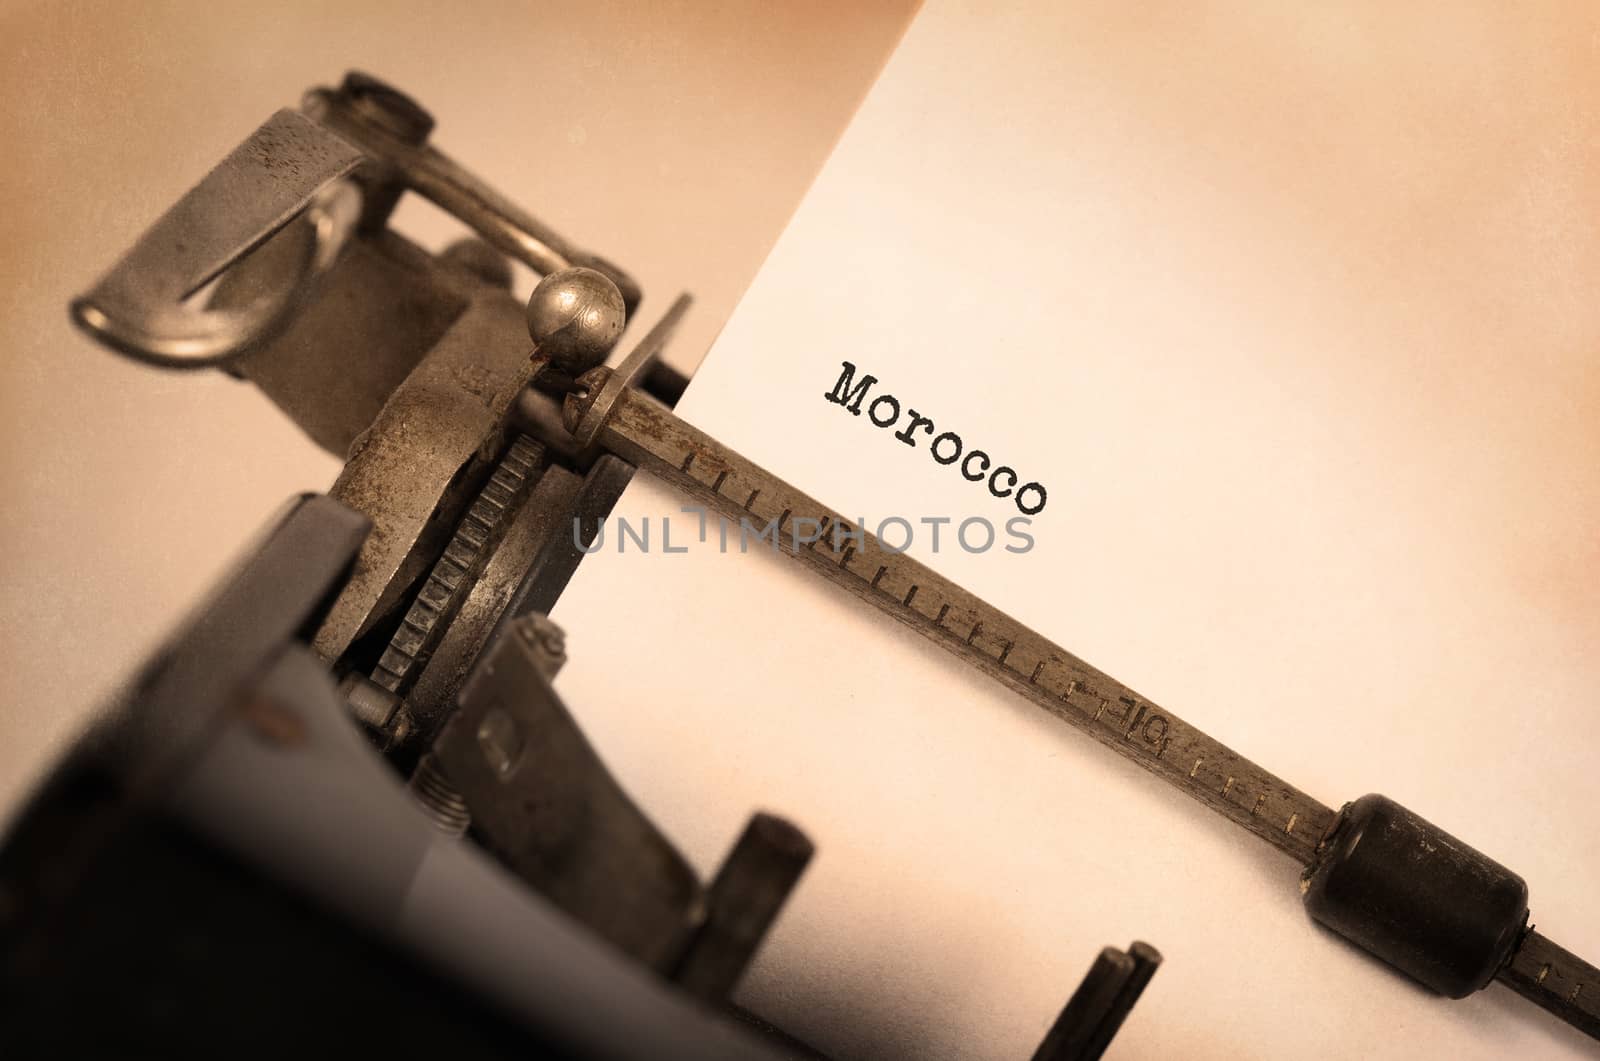 Old typewriter - Morocco by michaklootwijk